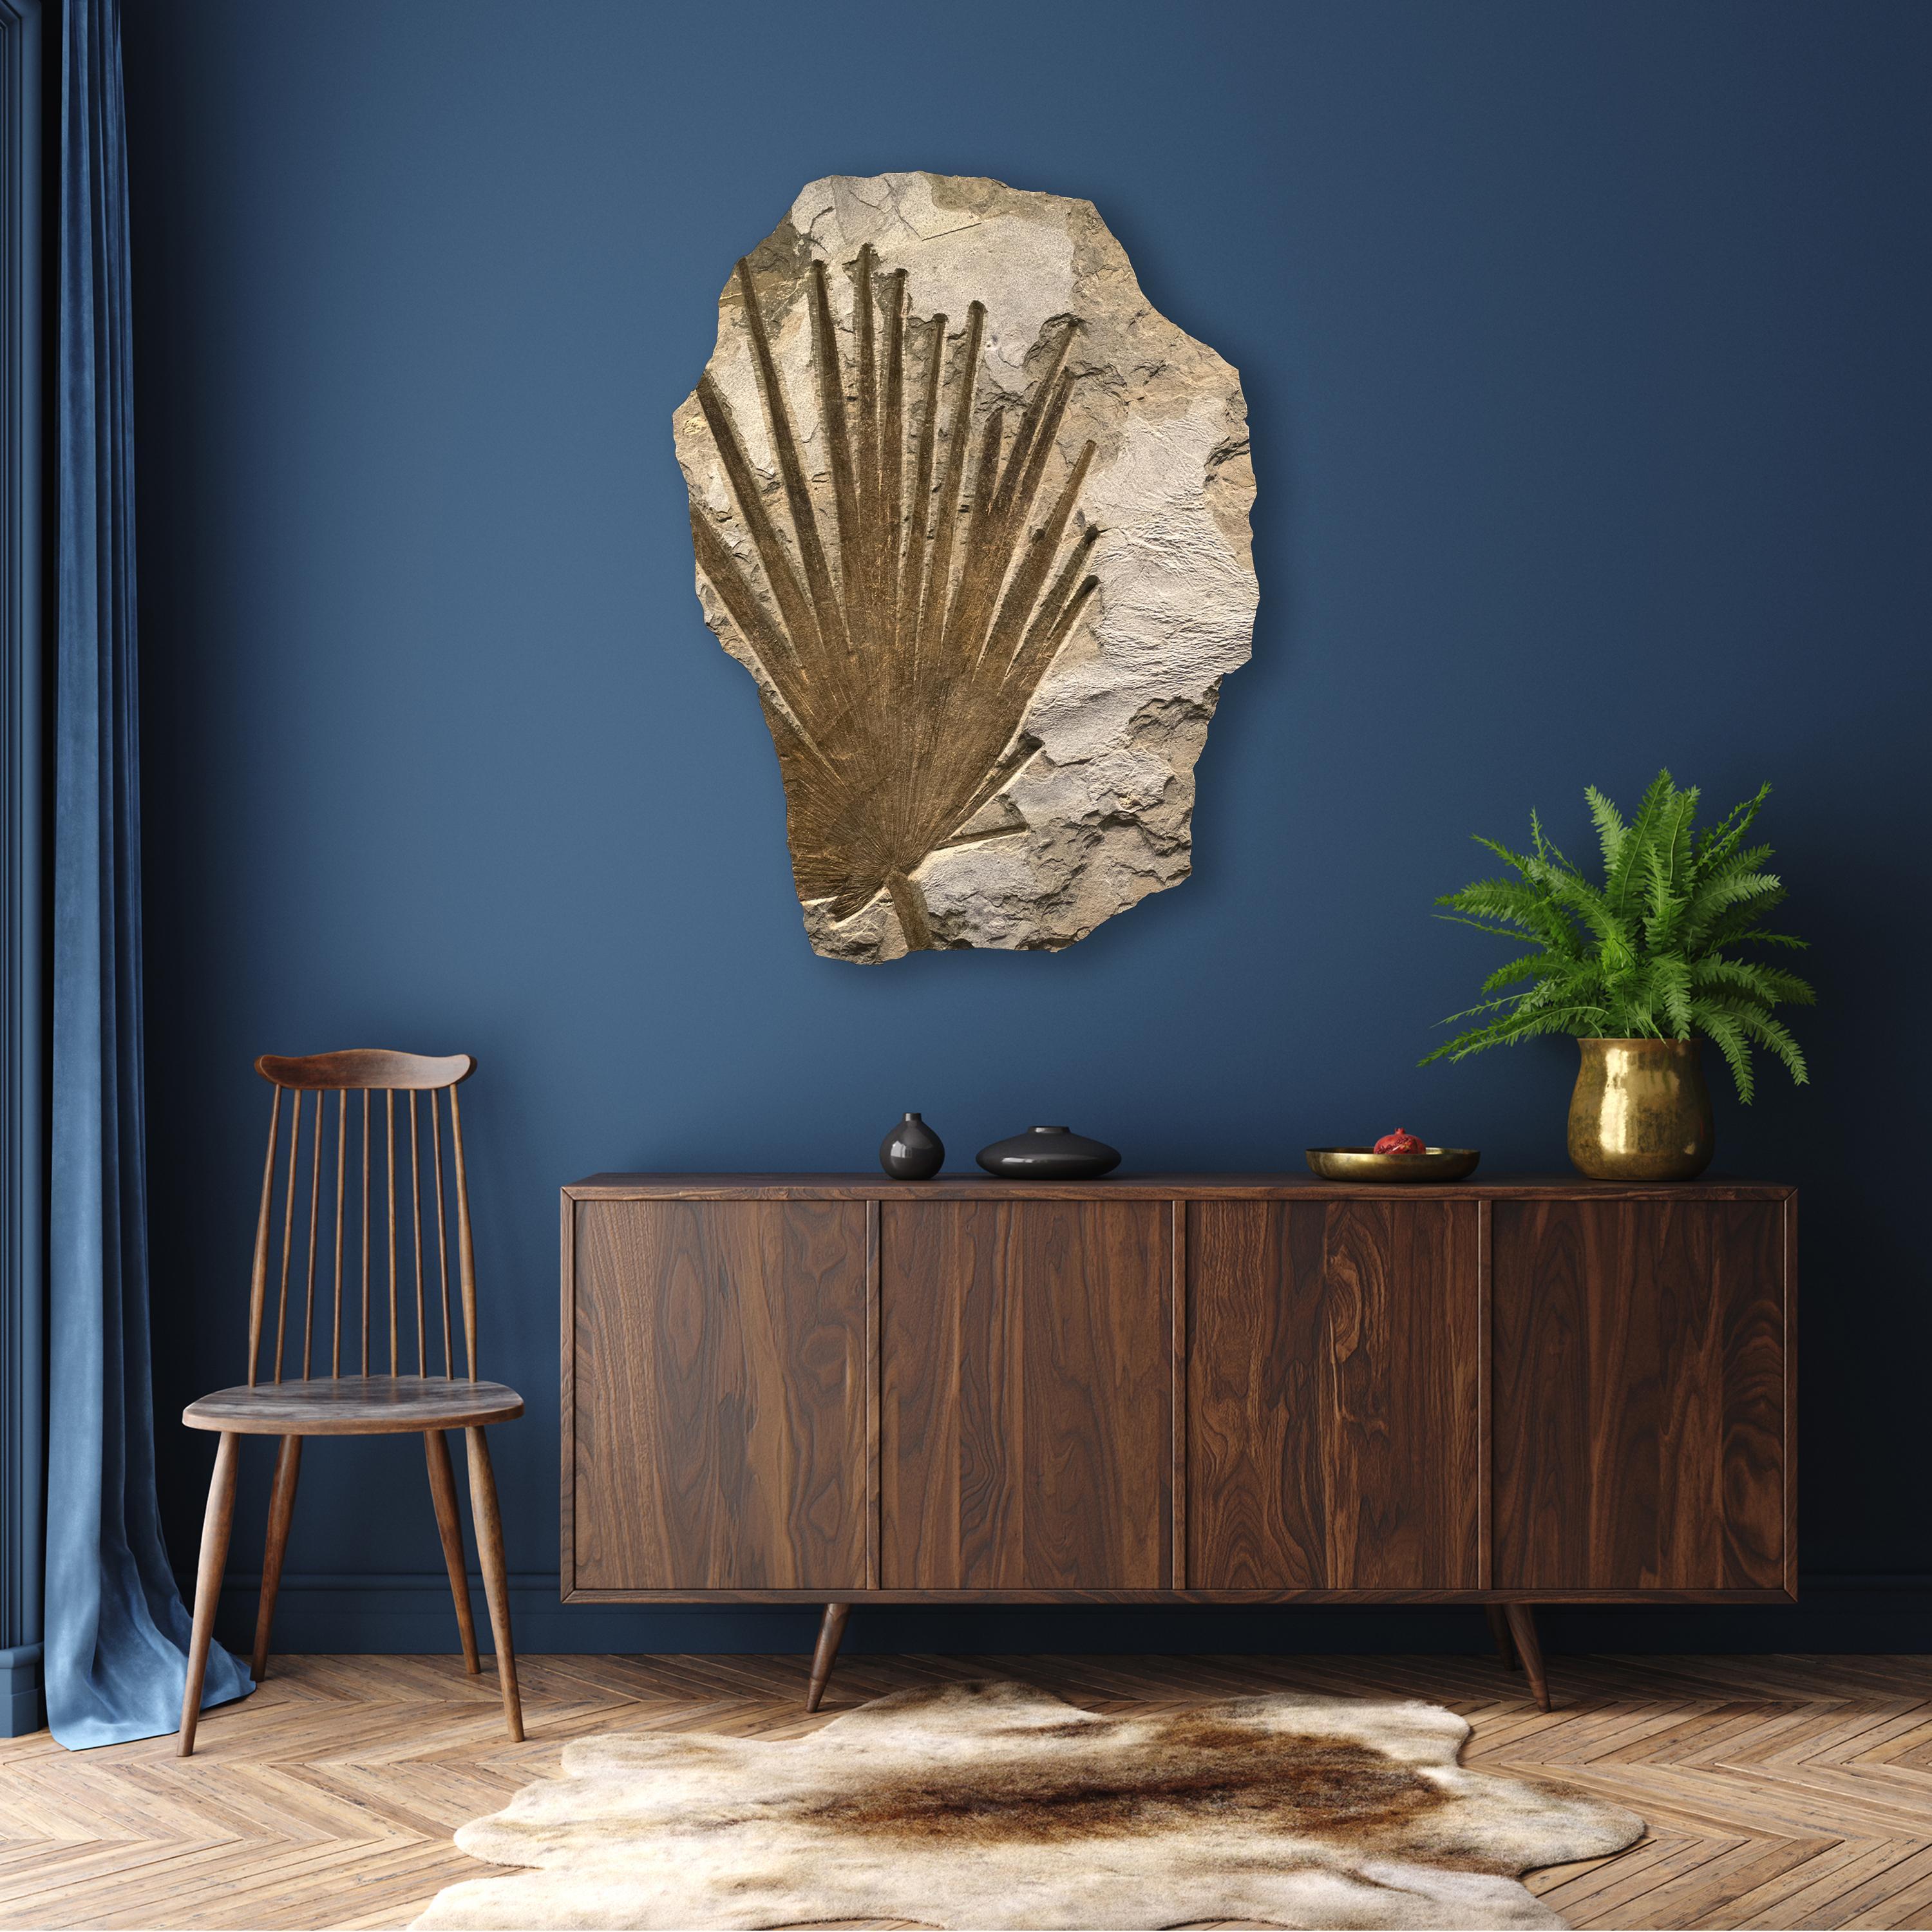 This mural features a sculptural fossilized palm frond from the Eocene era, dating back about 50 million years. Fragile plant life often produces some of the most aesthetic Green River Formation fossils we have prepared over the years. Due to the